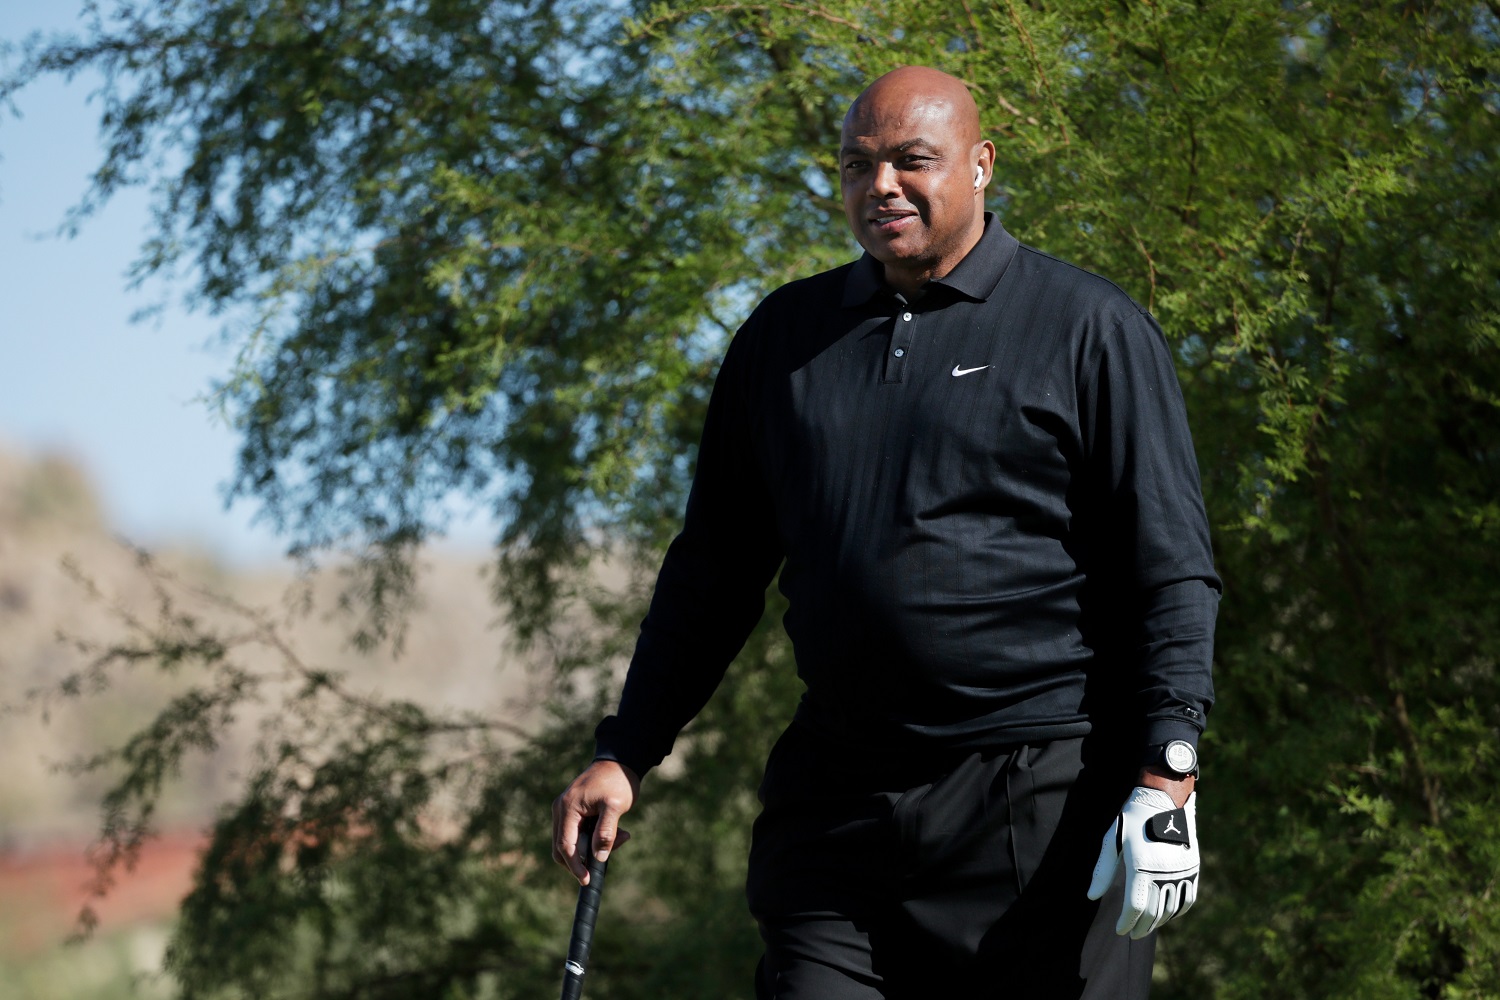 TNT basketball analyst Charles Barkley broke away from NCAA Tournament talk to criticize both major political parties over their handling or race relations in the United States. |Cliff Hawkins/Getty Images for The Match